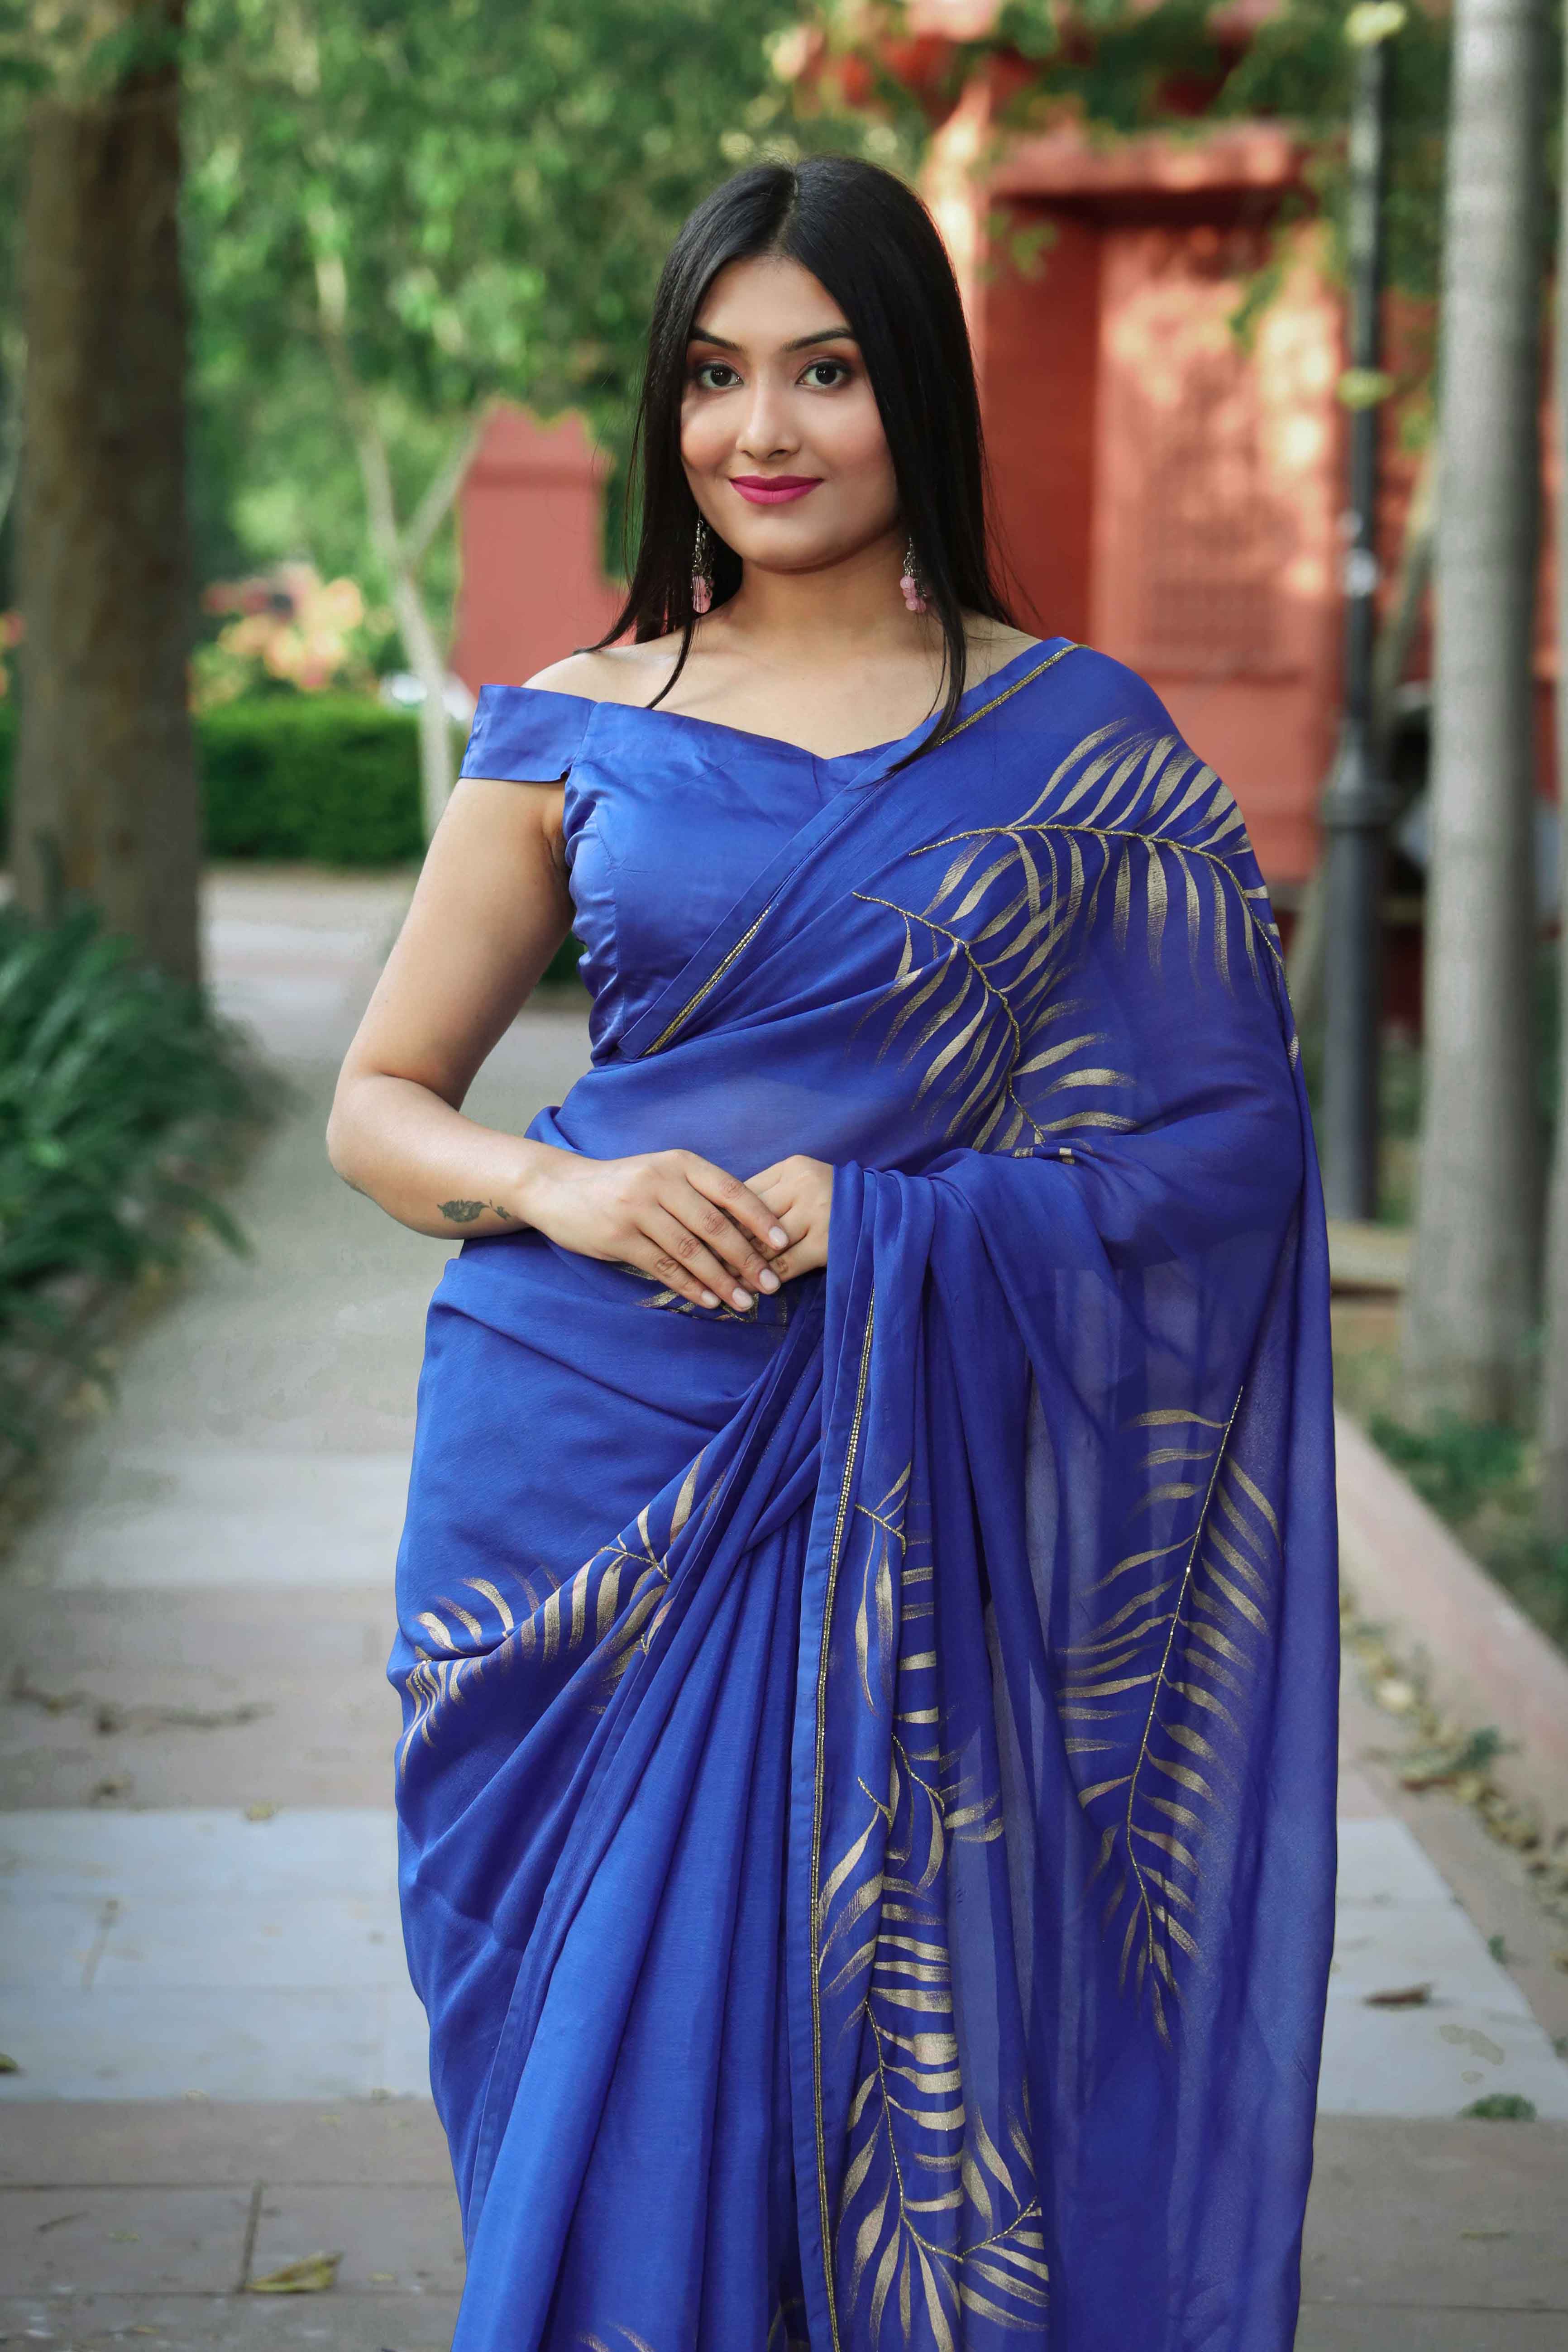 Pretty Girl Wearing a Blue Saree Dress on Studio Stock Photo - Image of  confidence, blue: 136051564